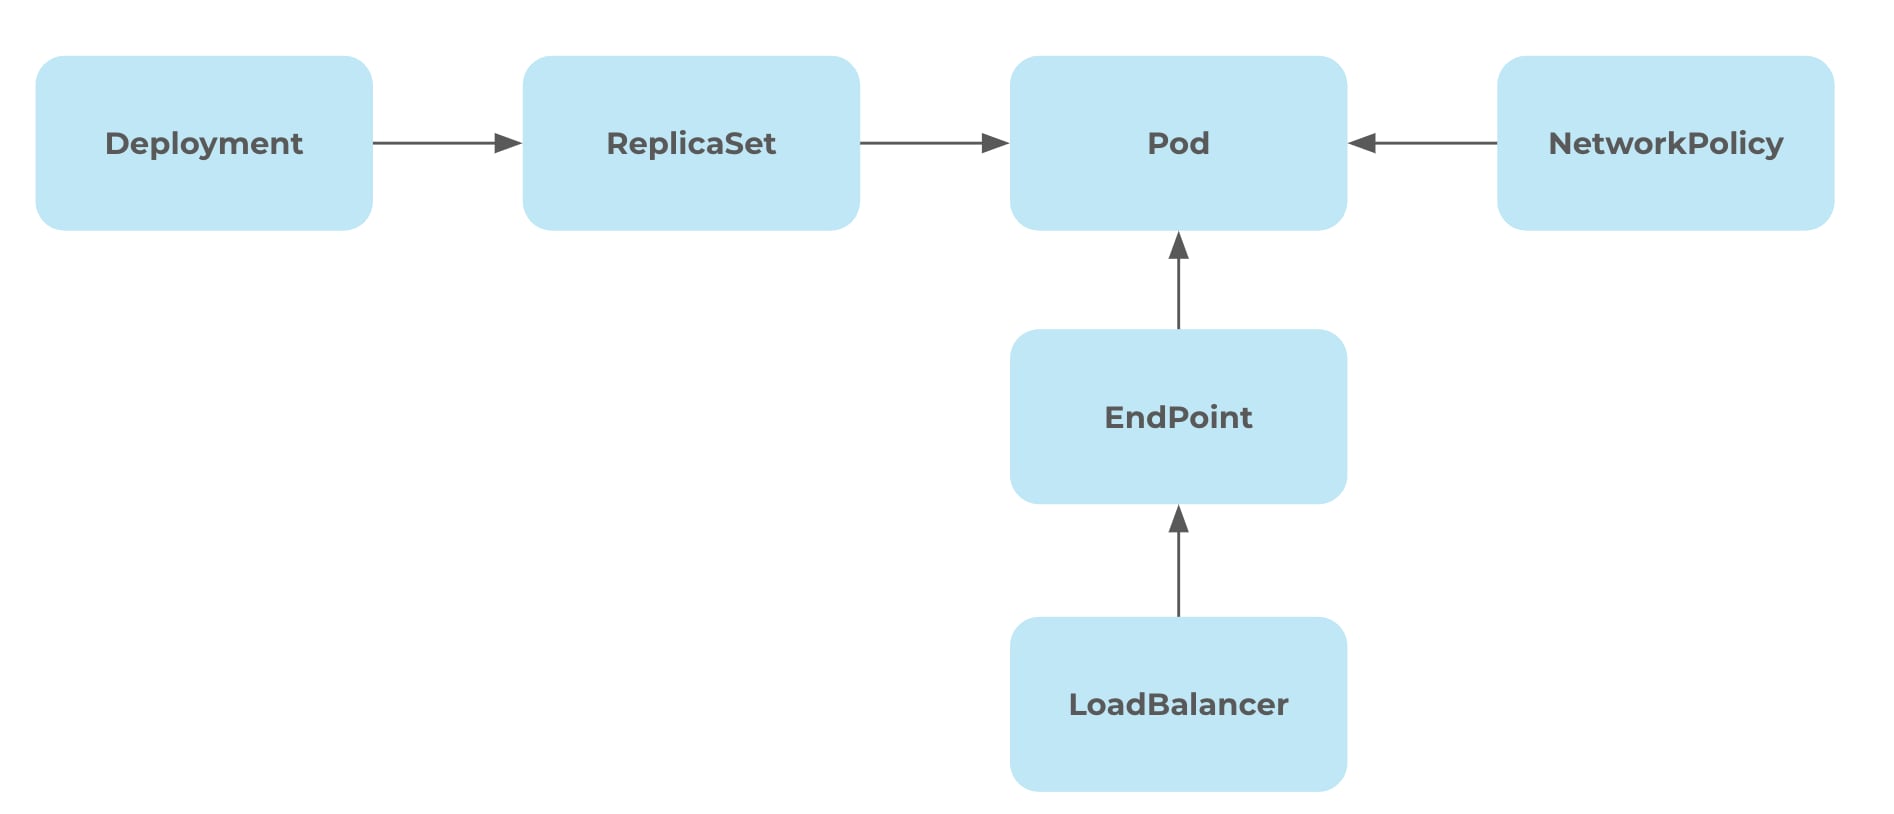 A simple Kubernetes deployment that’s exposed via a LoadBalancer.